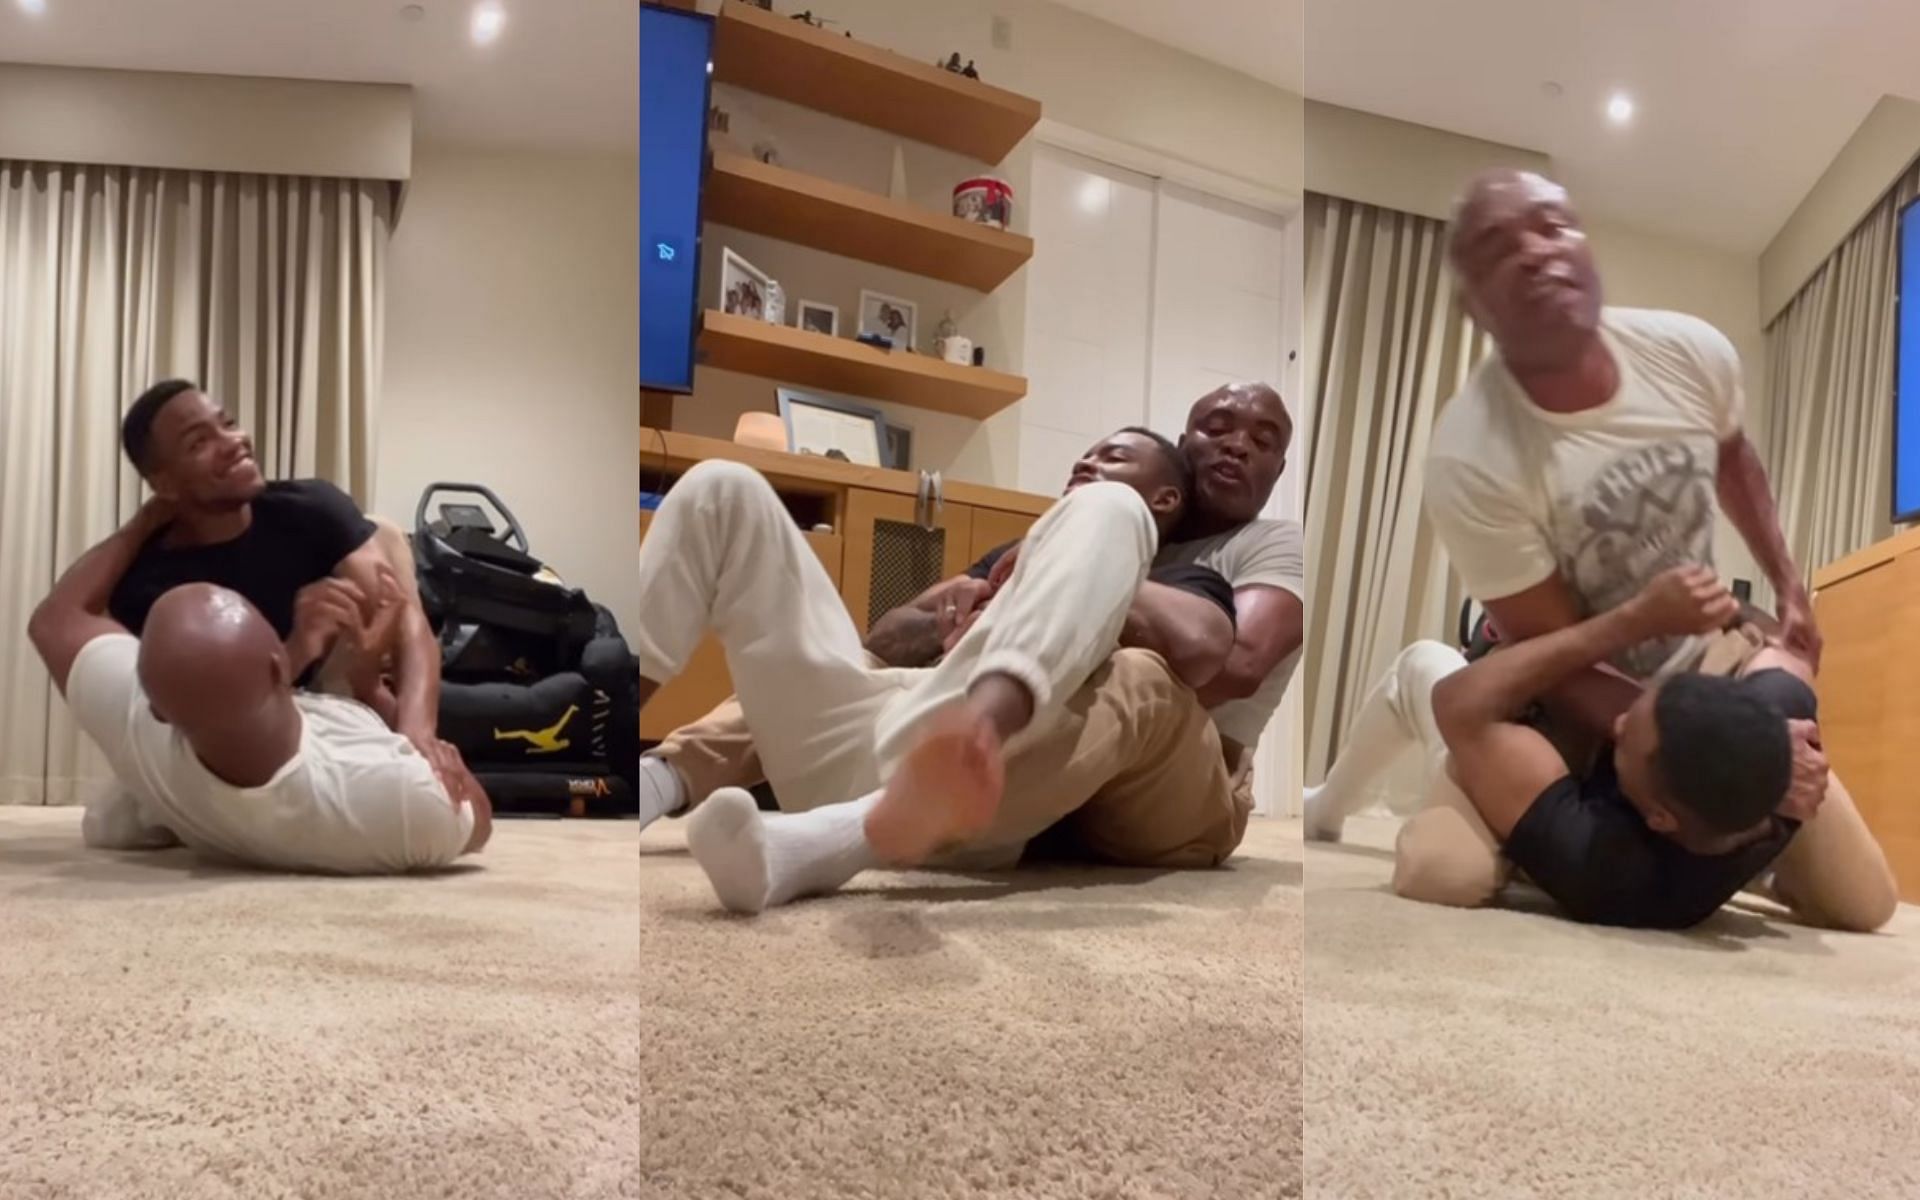 Screenshots of Anderson Silva rolling with his son [Images Courtesy: @kalylsilva on Instagram]